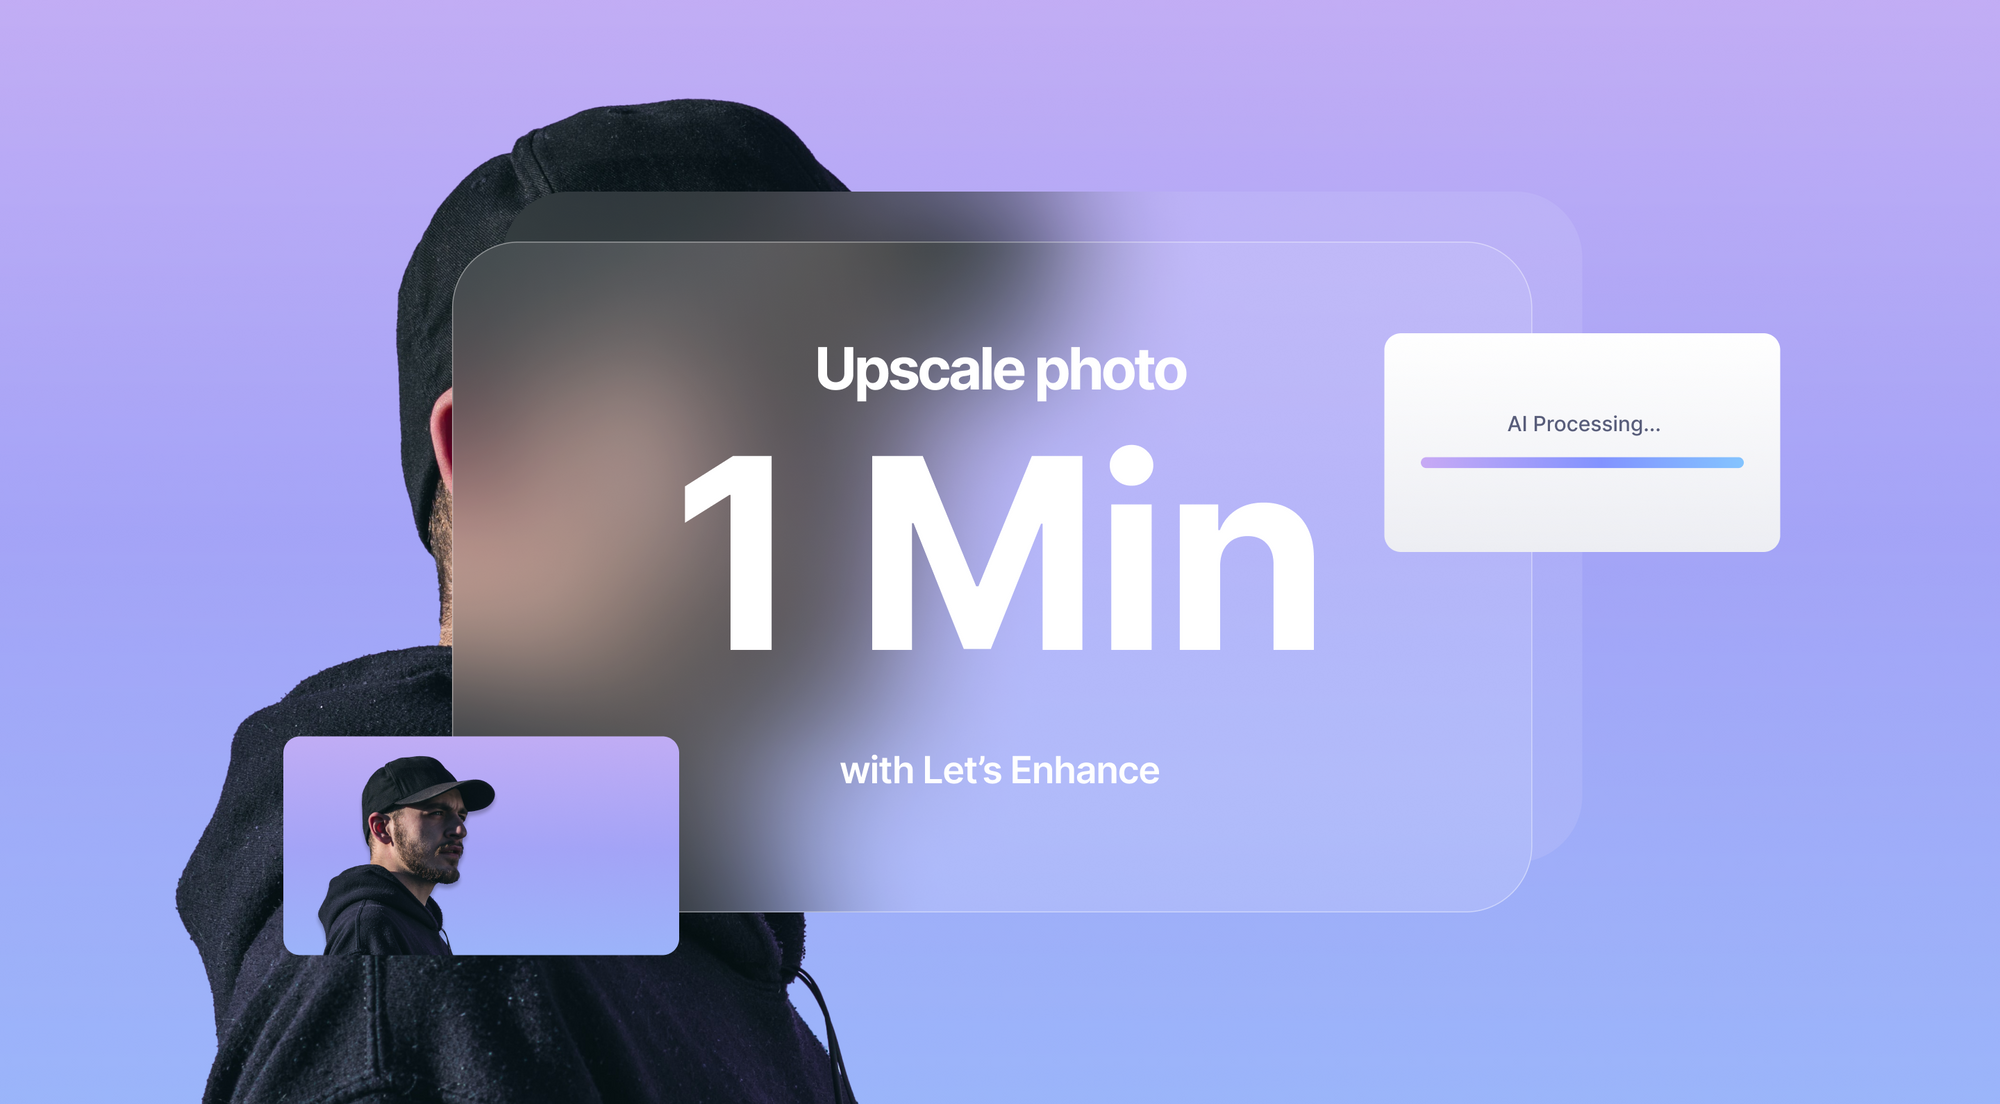 Tutorial #1: How to Upscale a Photo in One Minute with Let's Enhance